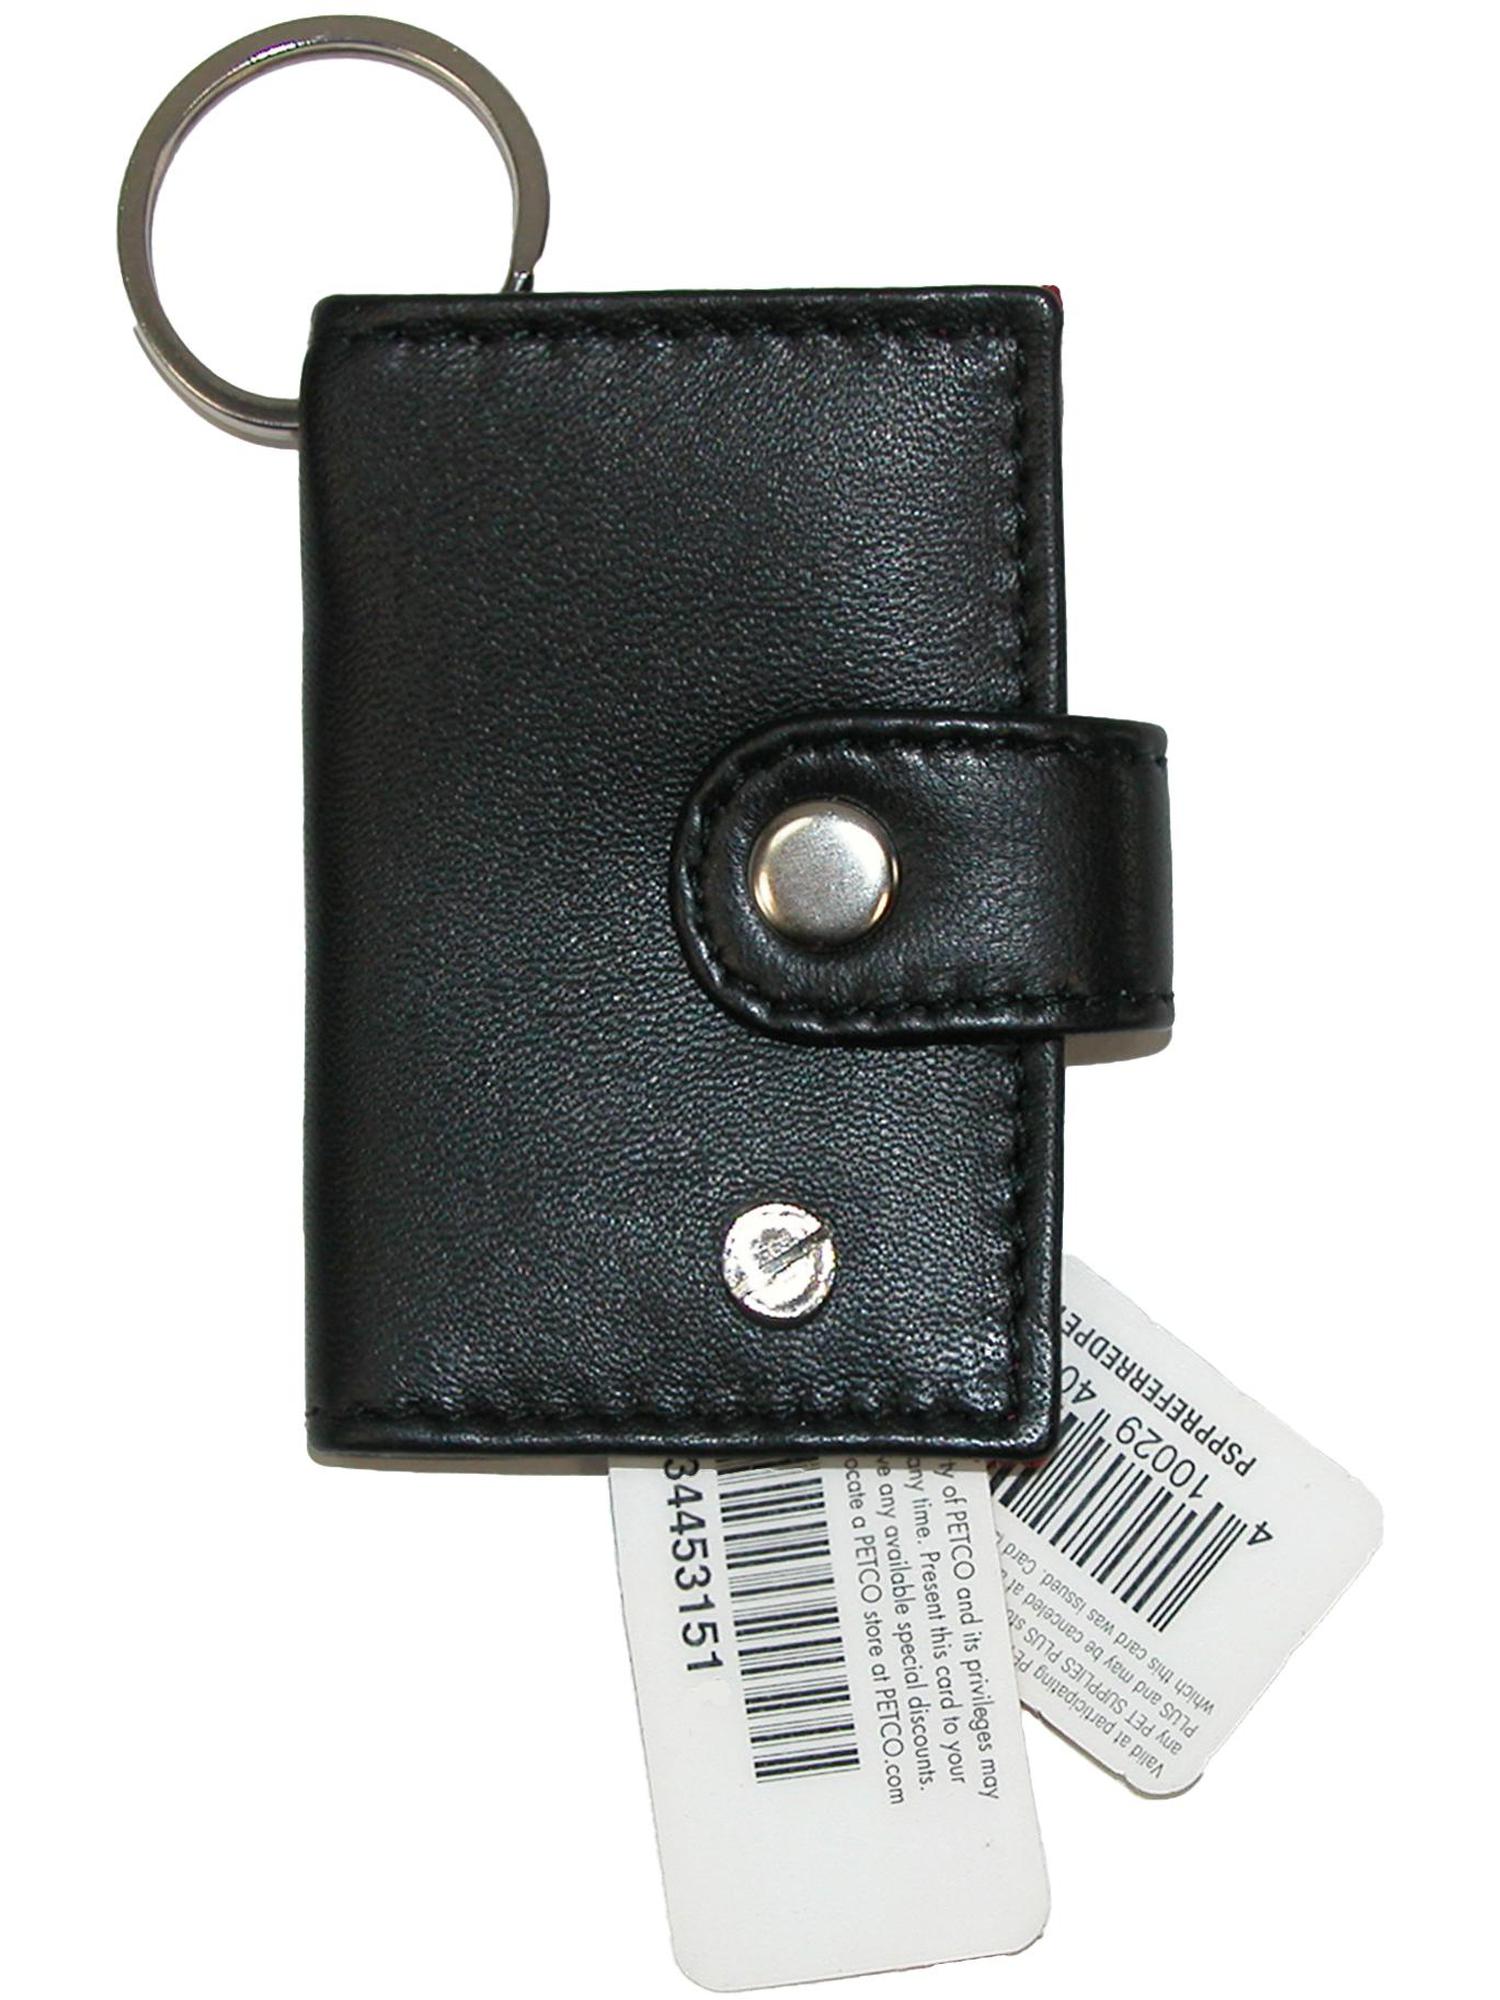 CTM Leather Scan Card Key Chain Wallet - image 3 of 3